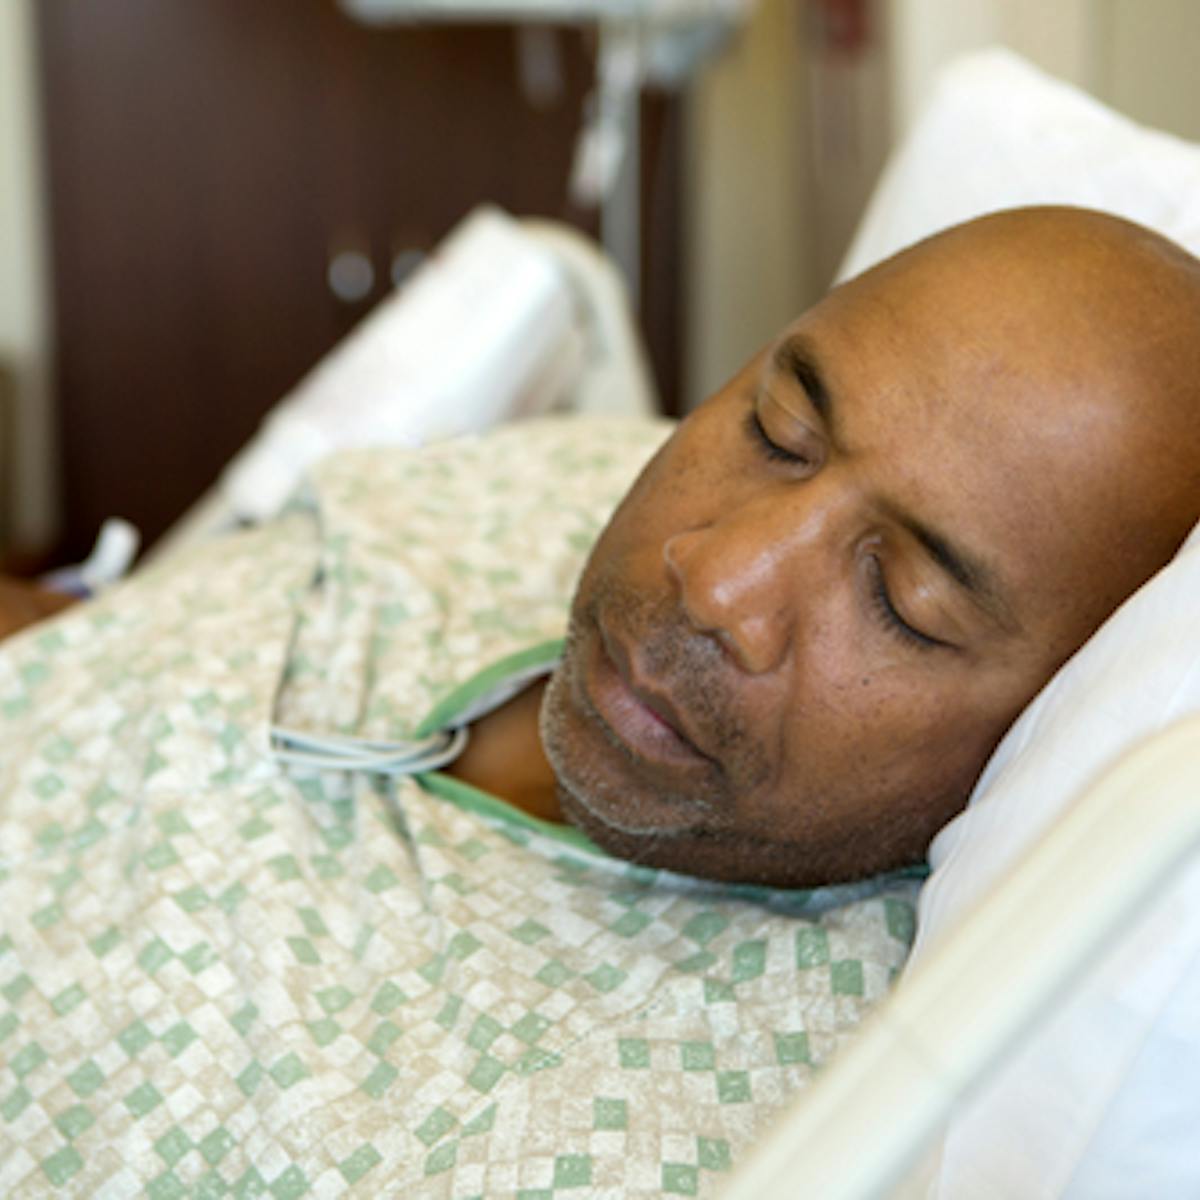 Dying while black: Perpetual gaps exist in health care for African-Americans